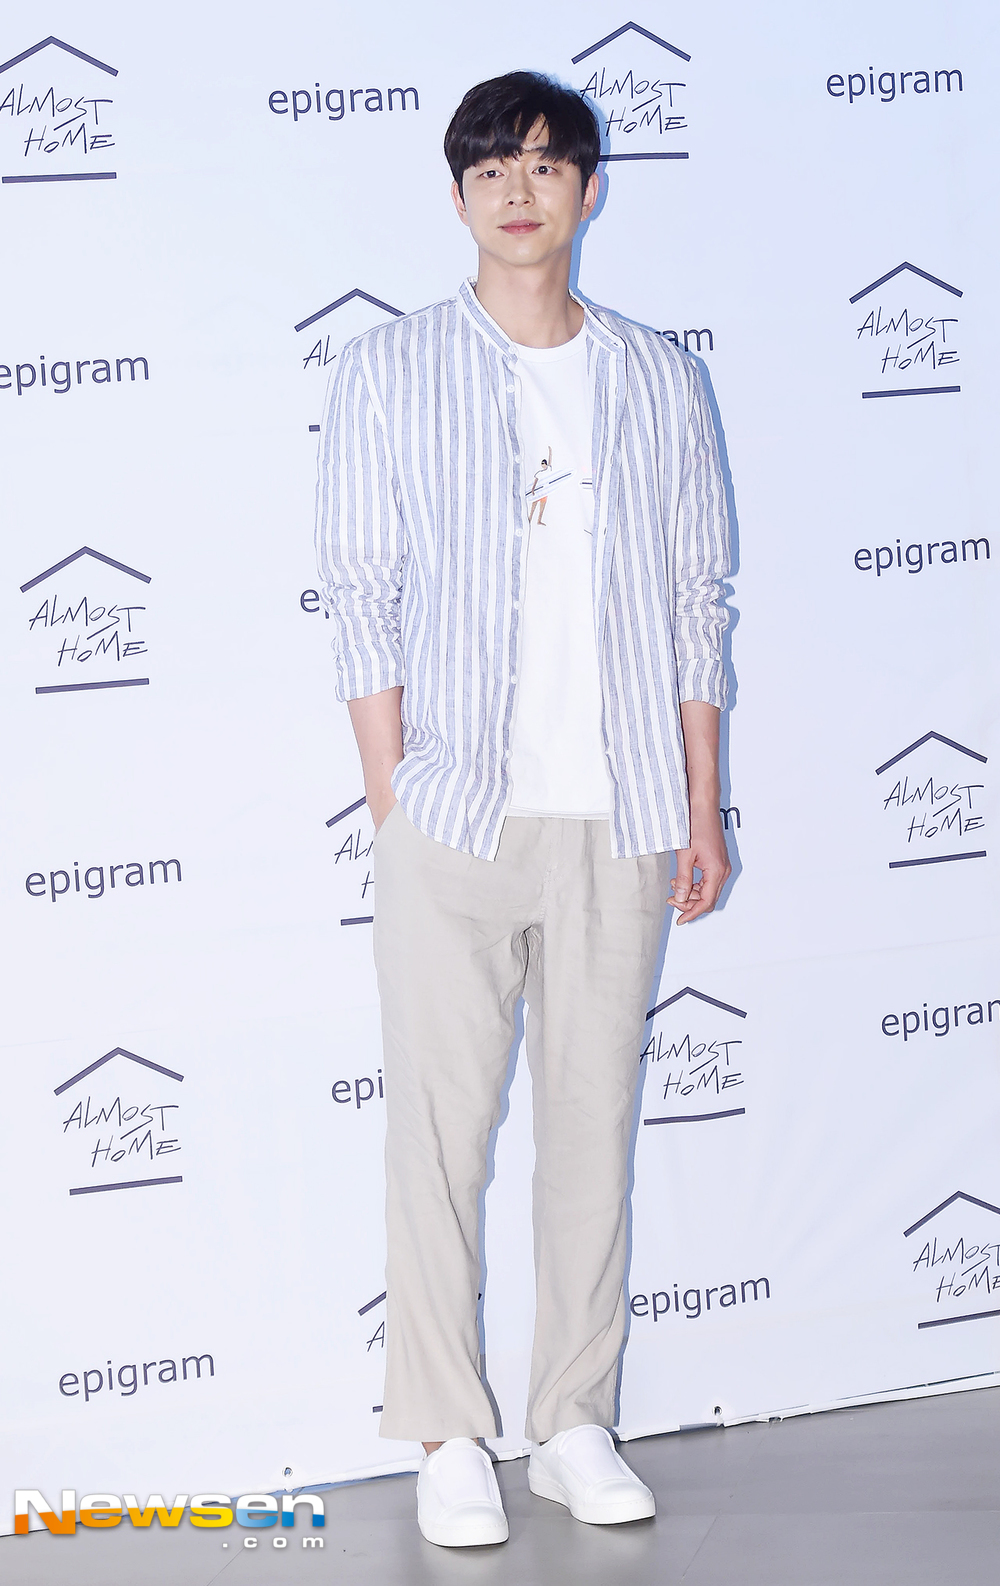 The Epigram Gong Yoo photo event was held on May 29 at the Seoul Yongsan District IPark Mall.On that day, Gong Yoo poses.kim hye-jin